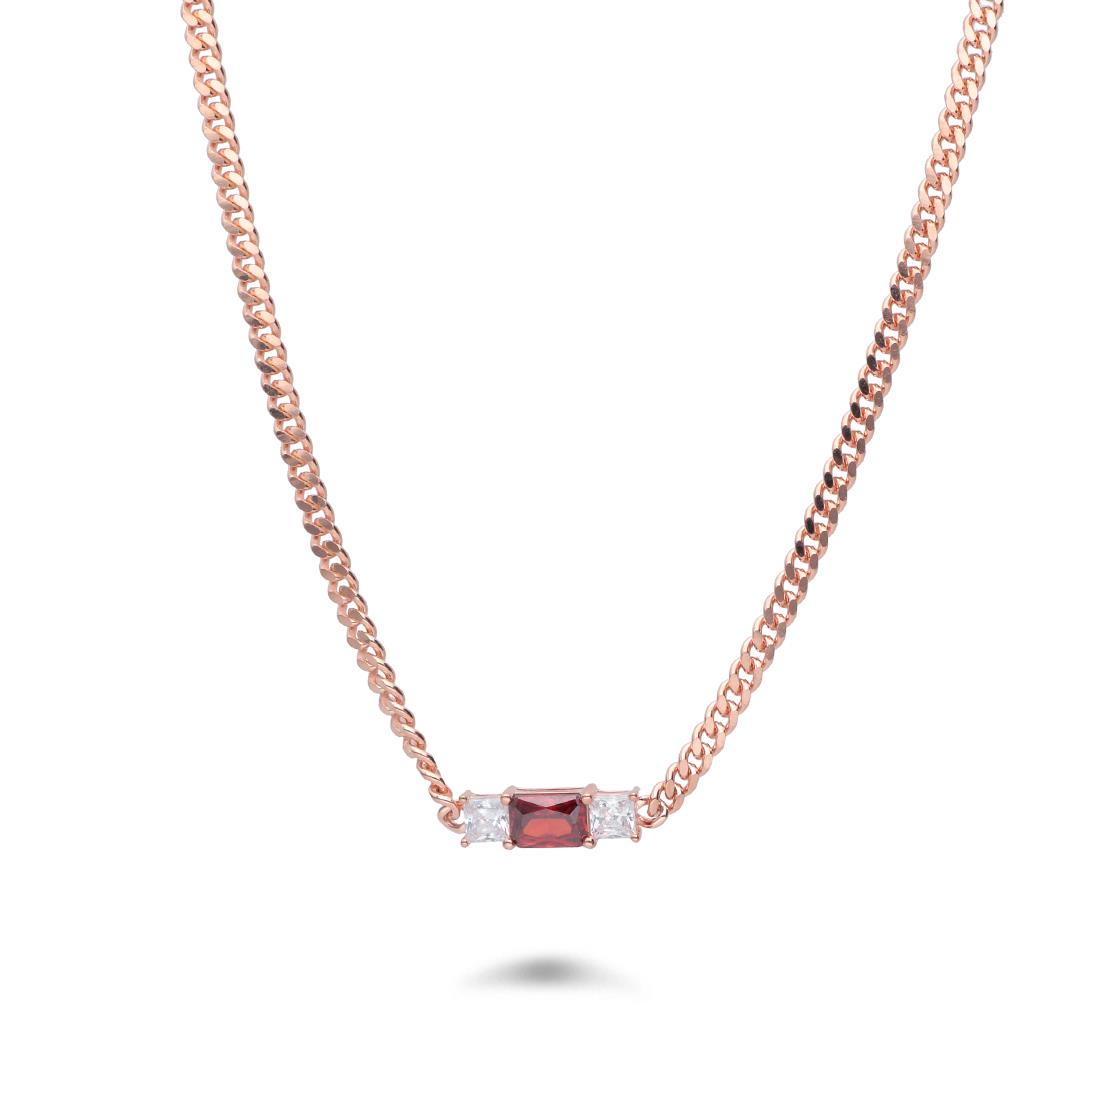 Necklace in pink silver with zircons - ORO&CO 925